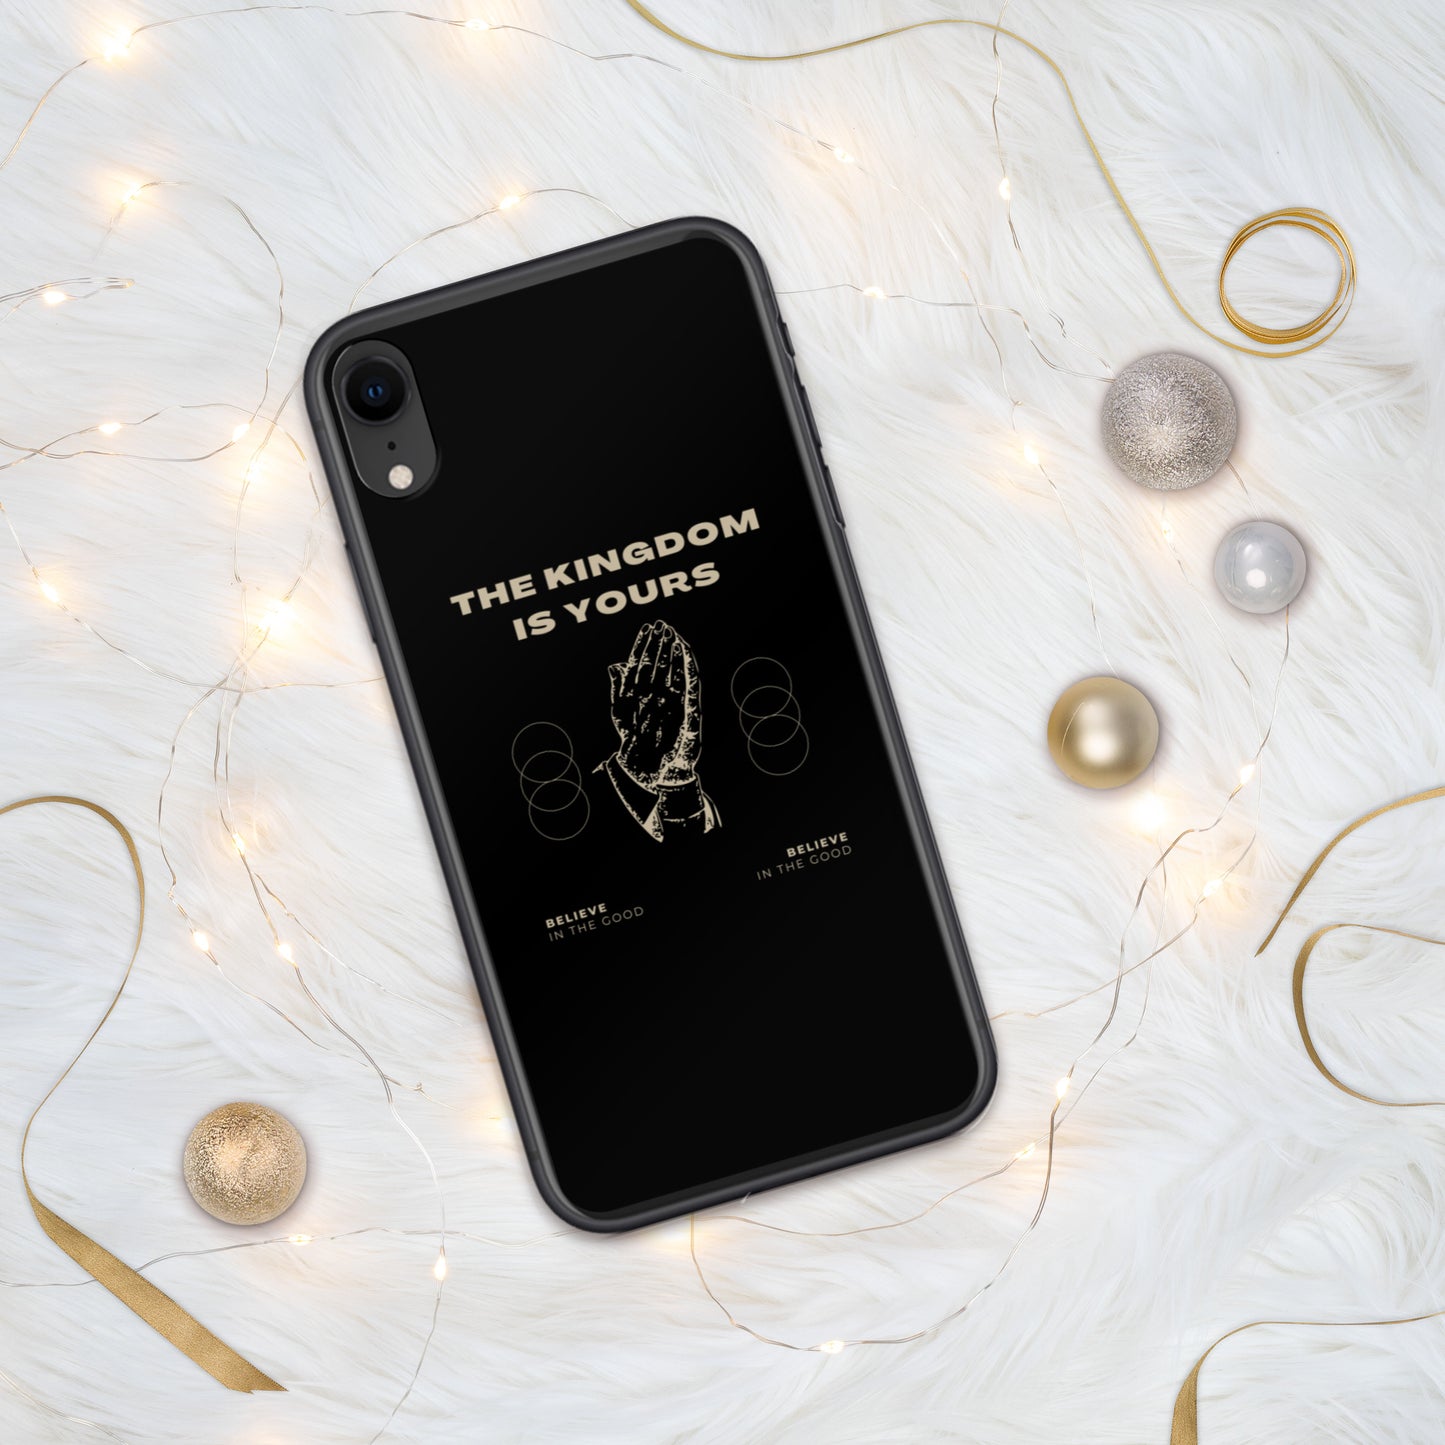 The Kingdom Is Yours - iPhone Case